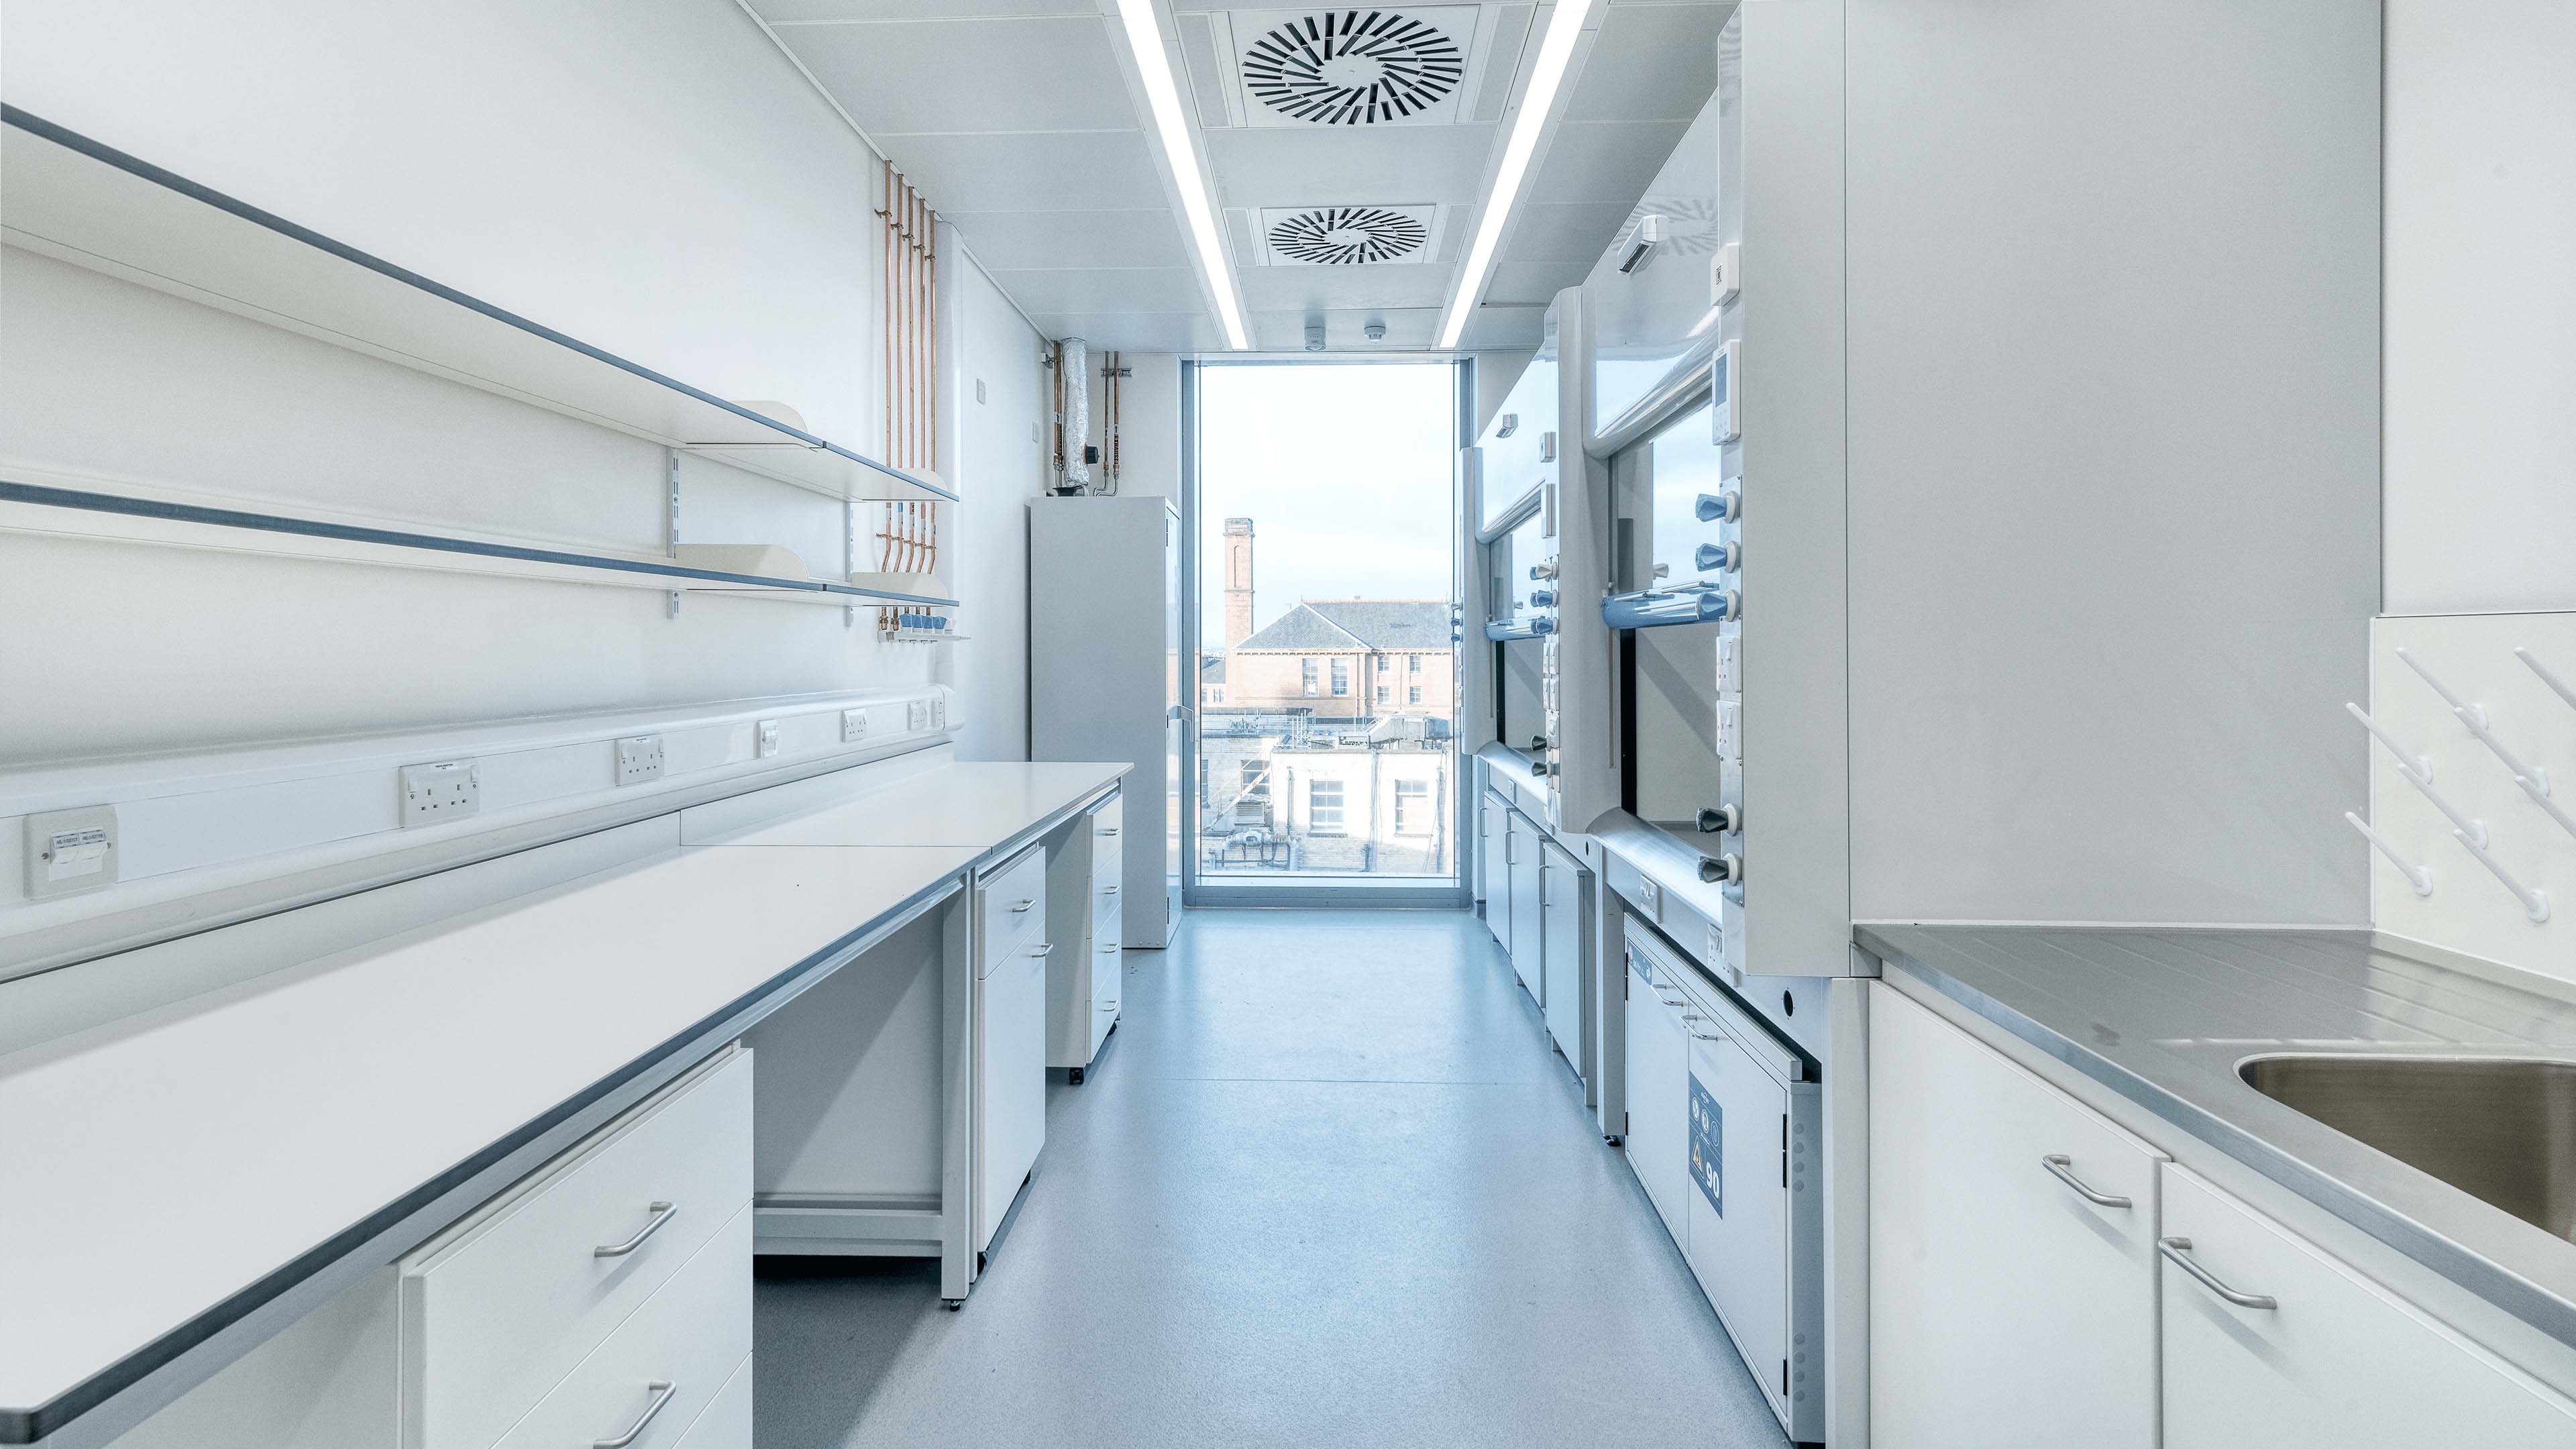 Compact laboratory space at the advanced research centre